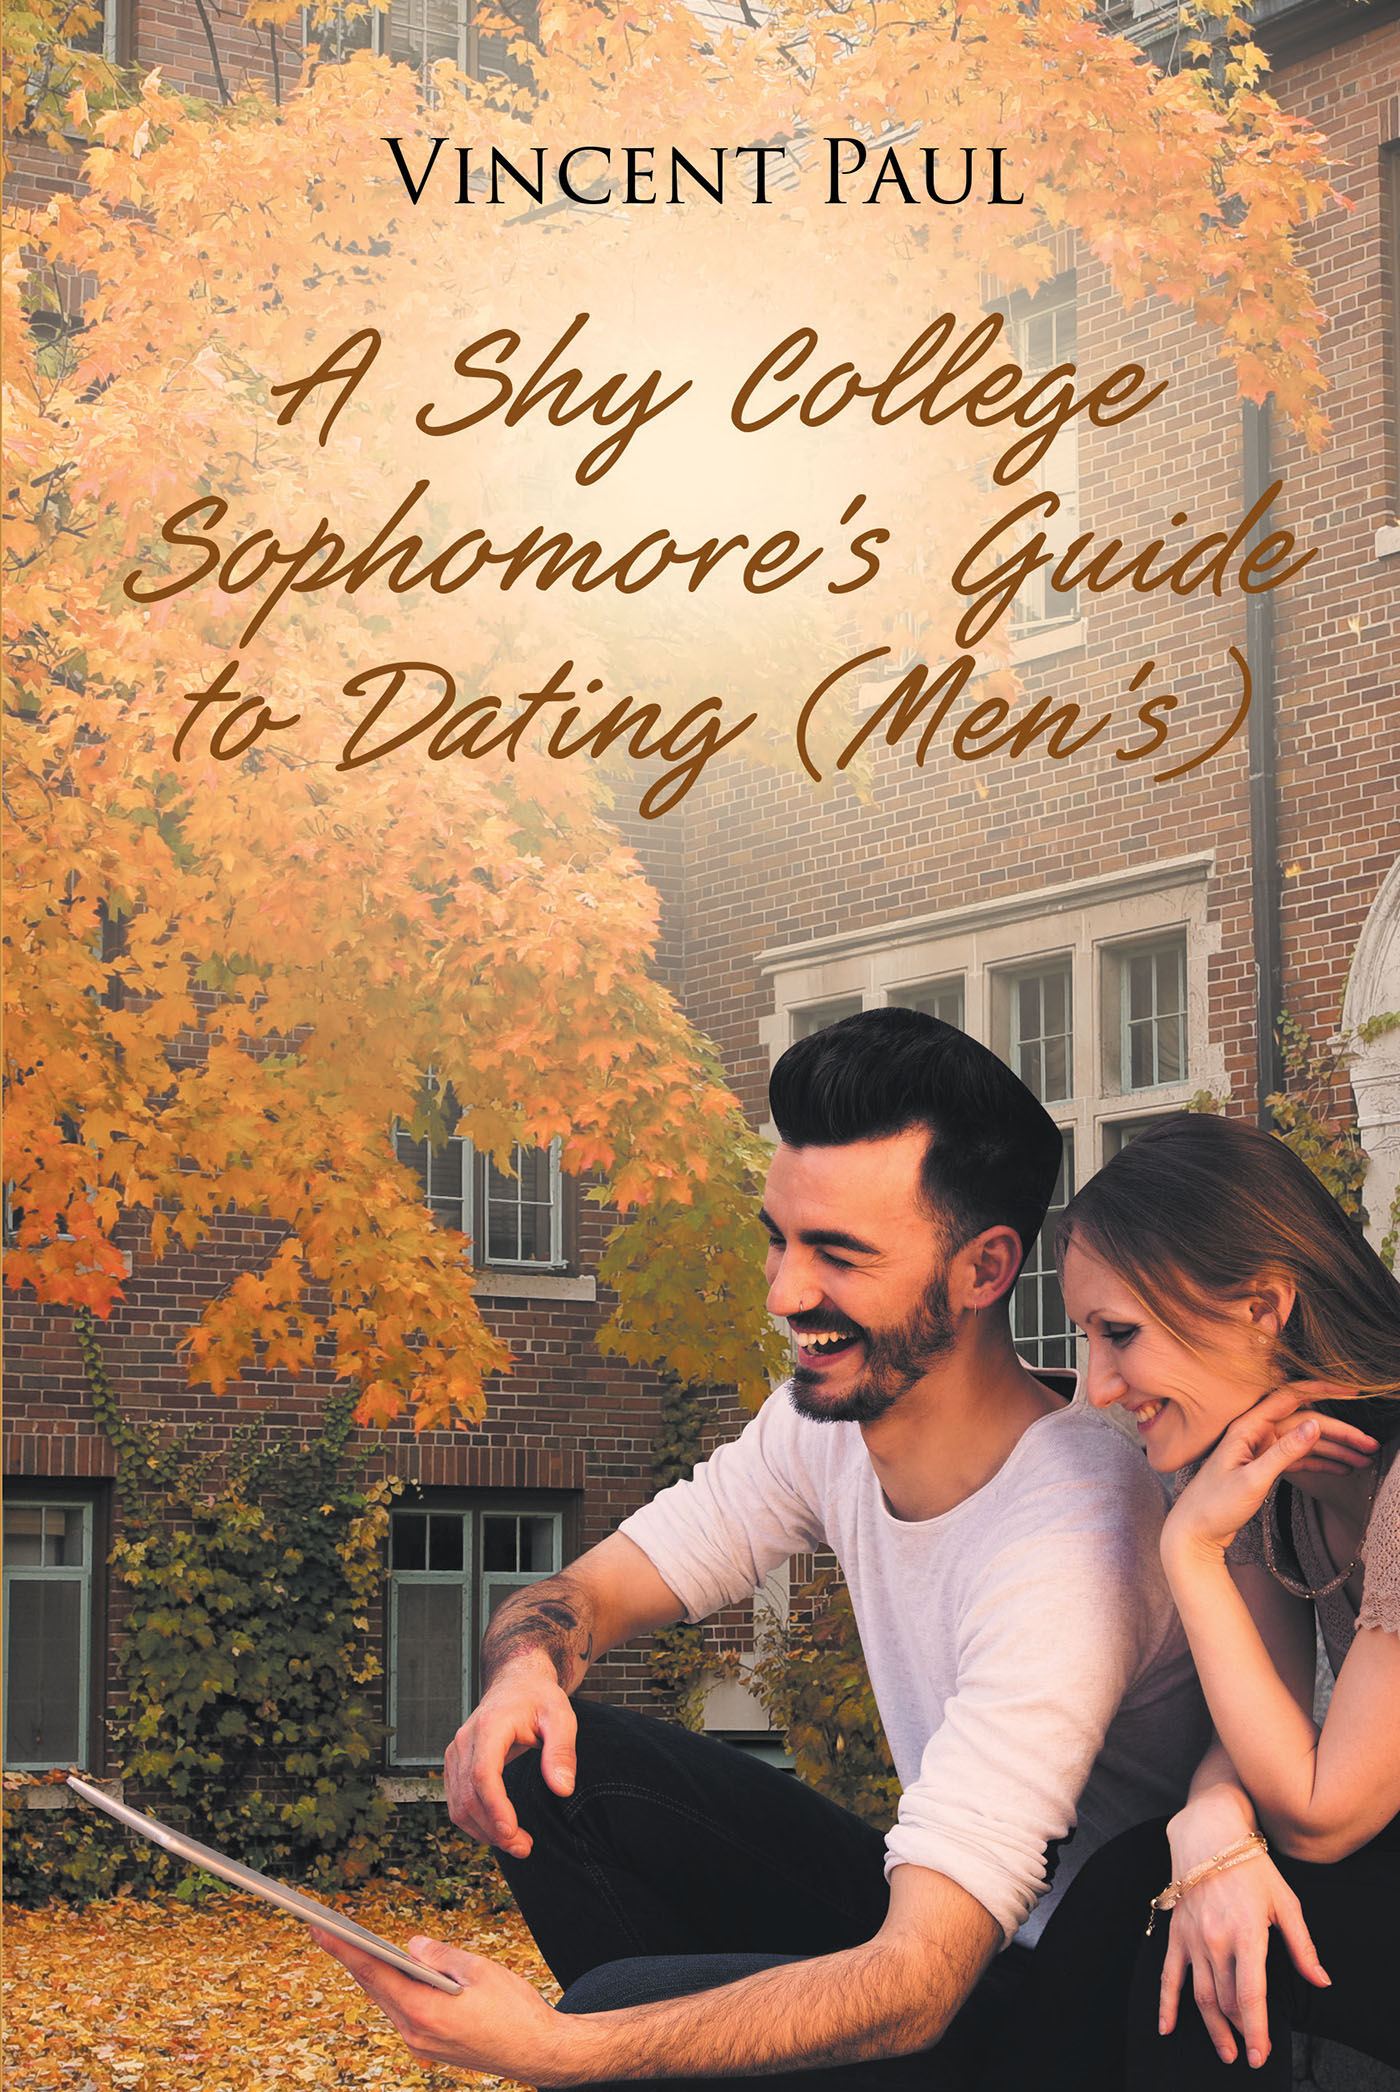 A Shy College Sophomore's Guide to Dating (Men's) Cover Image